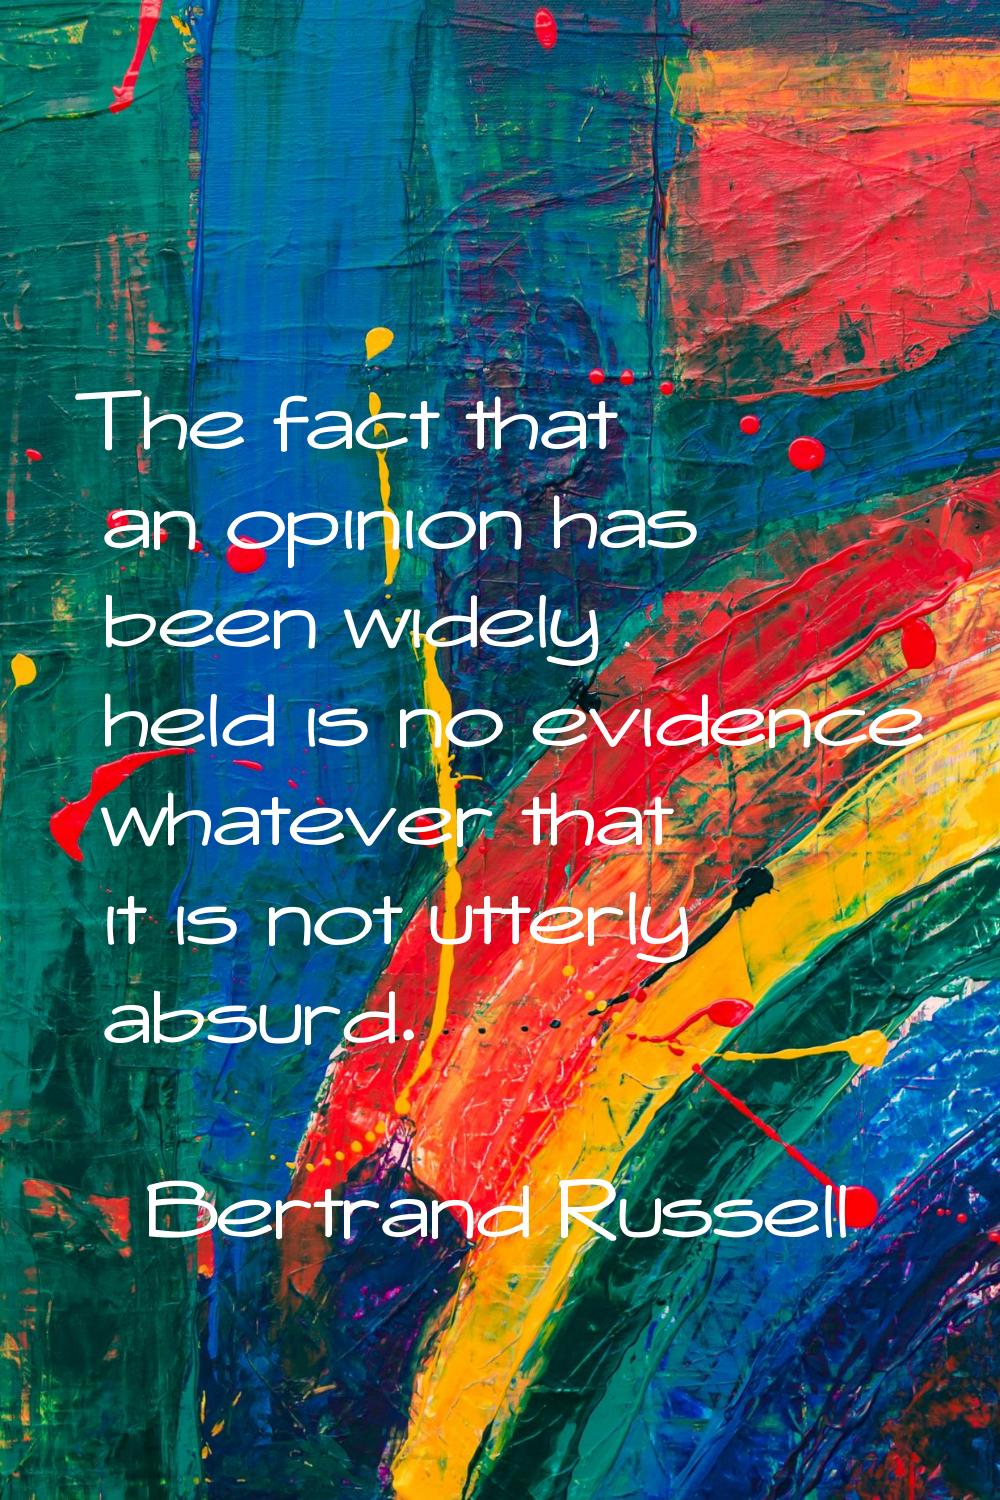 The fact that an opinion has been widely held is no evidence whatever that it is not utterly absurd